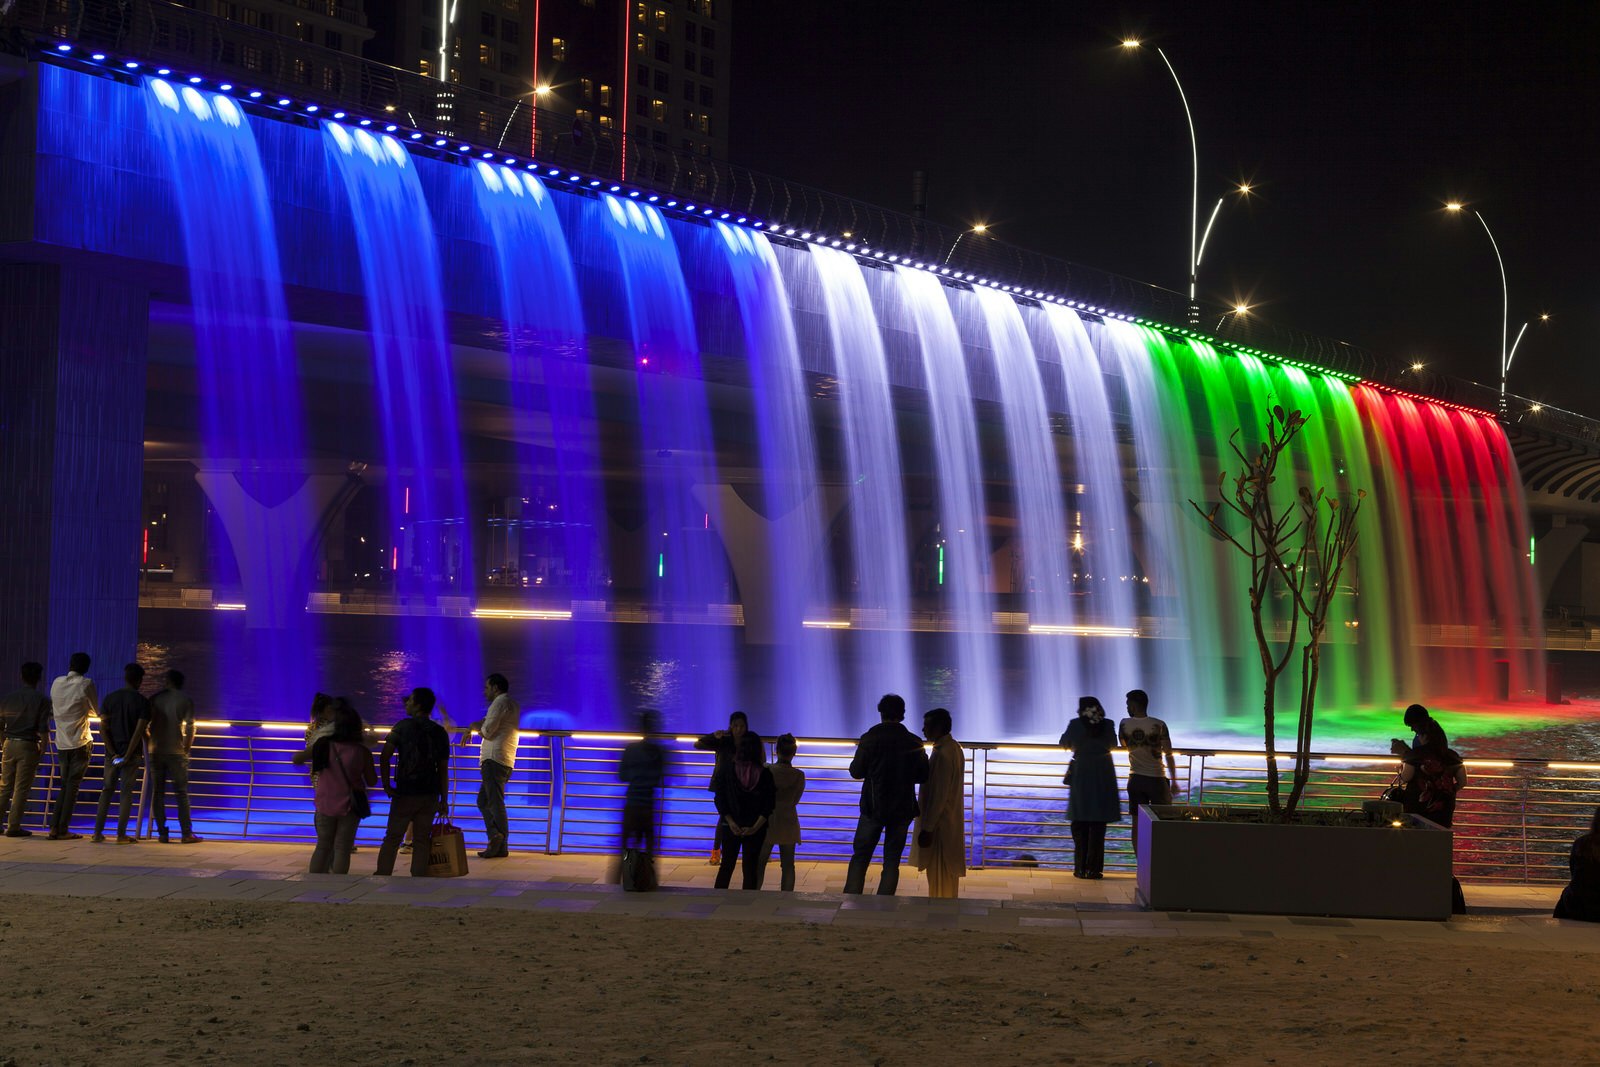 Colorful illuminated waterfall in Dubai. The waterfall is part of the Dubai Water Canal development. United Arab Emirates, Middle East.